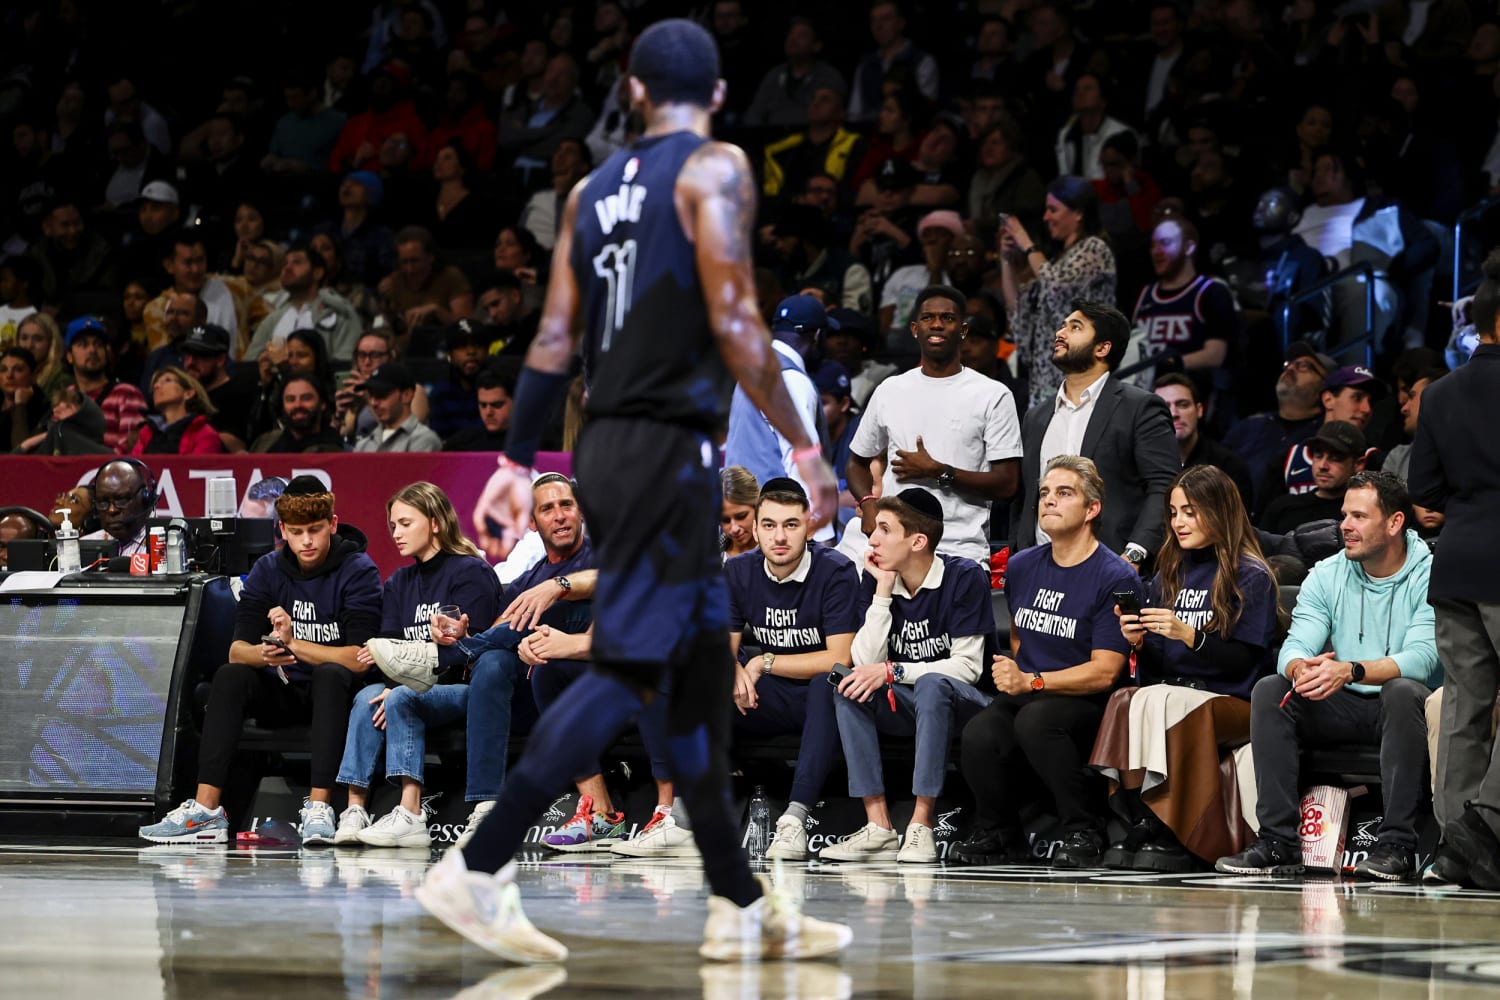 I won't stand down': Nets' Kyrie Irving defends post about